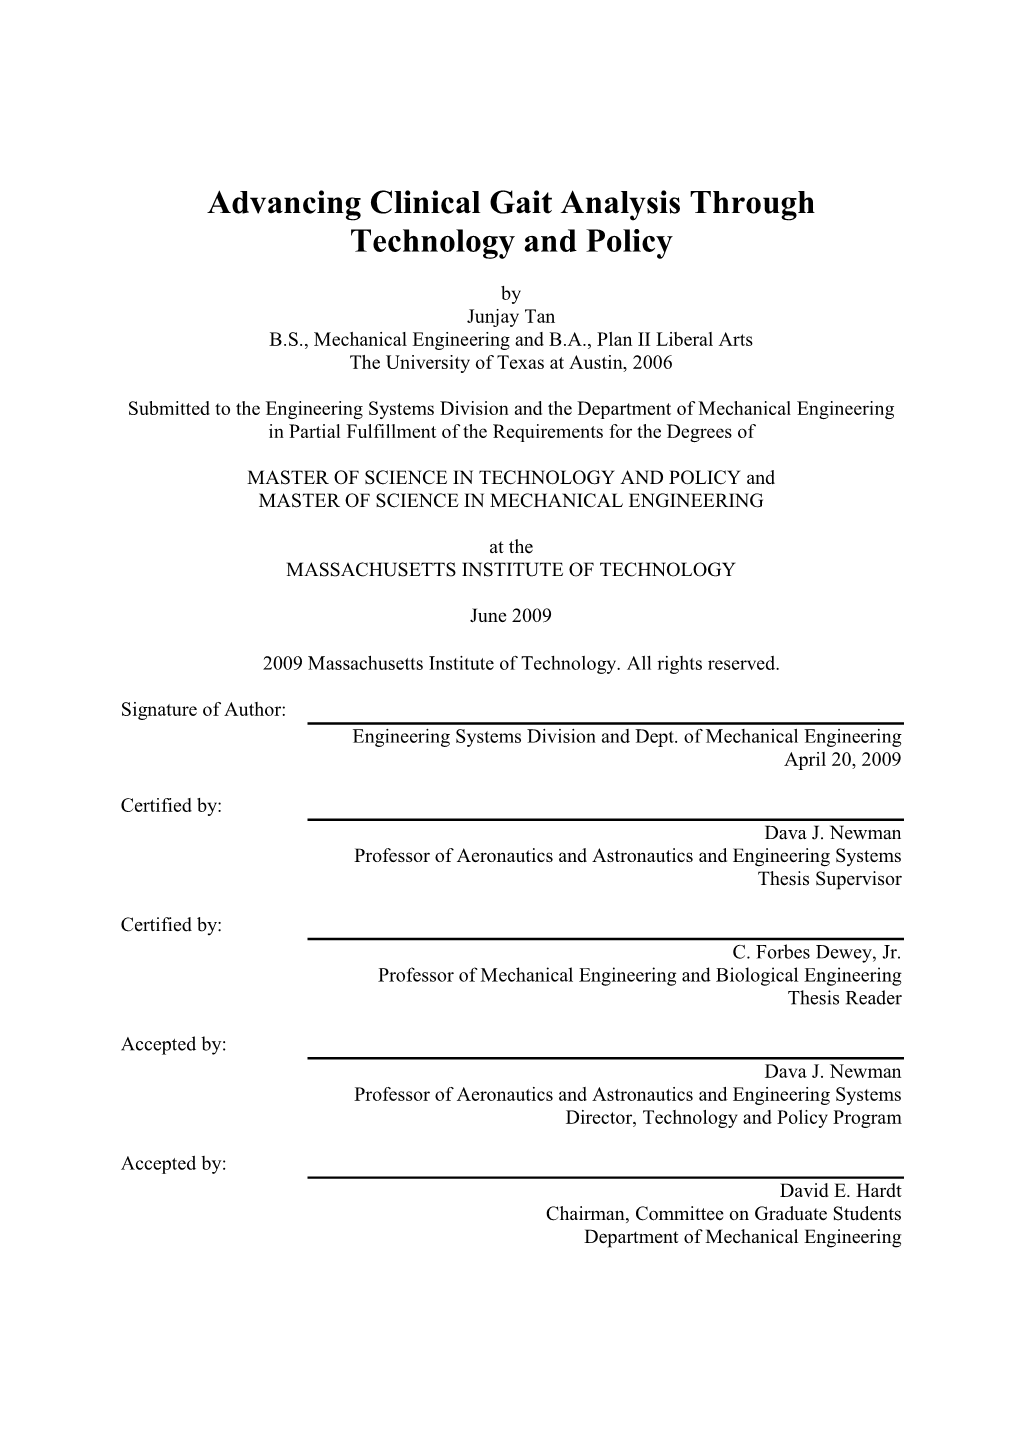 Advancing Clinical Gait Analysis Through Technology and Policy